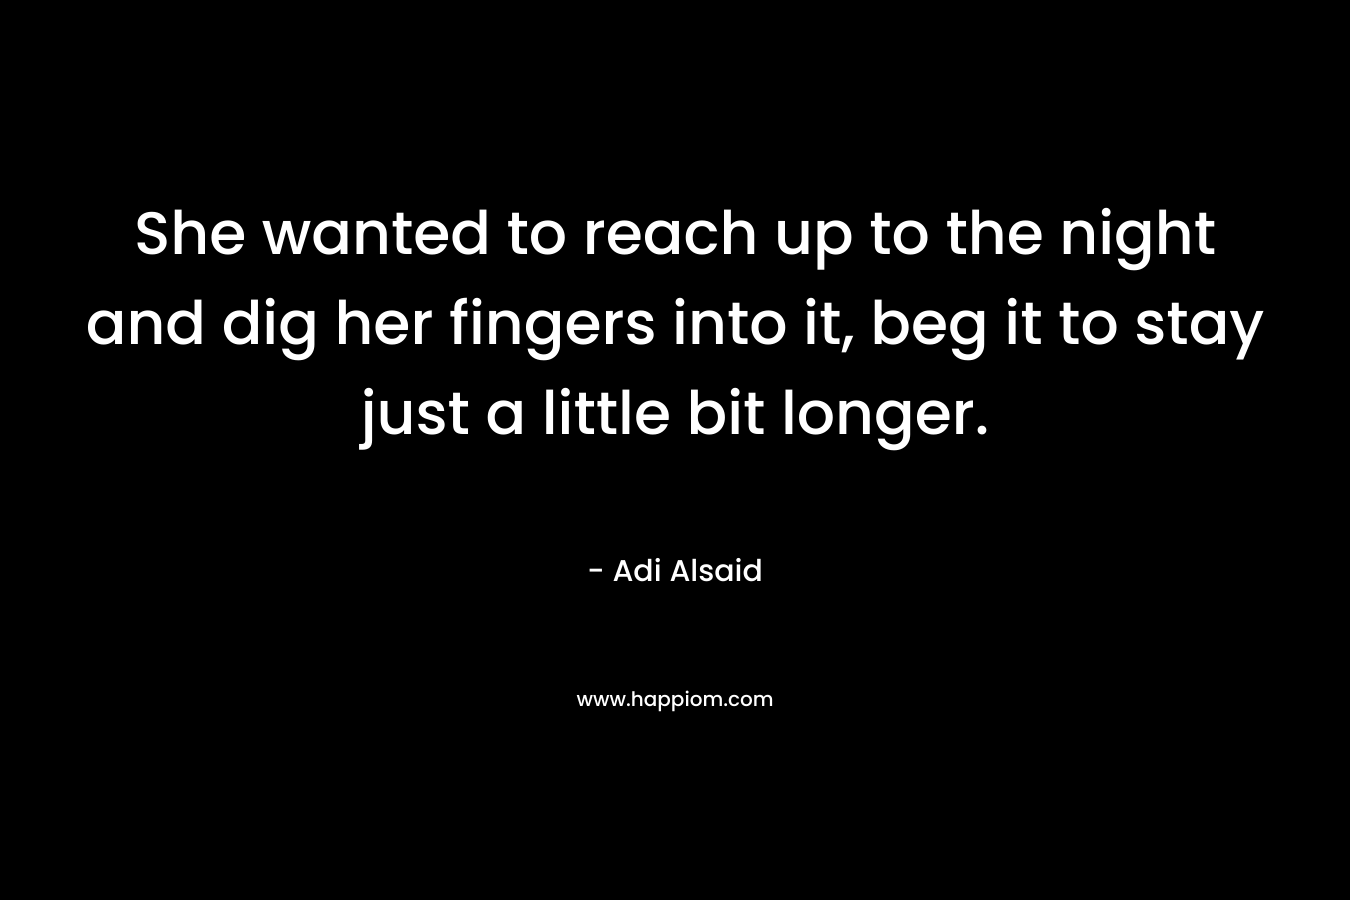 She wanted to reach up to the night and dig her fingers into it, beg it to stay just a little bit longer. – Adi Alsaid